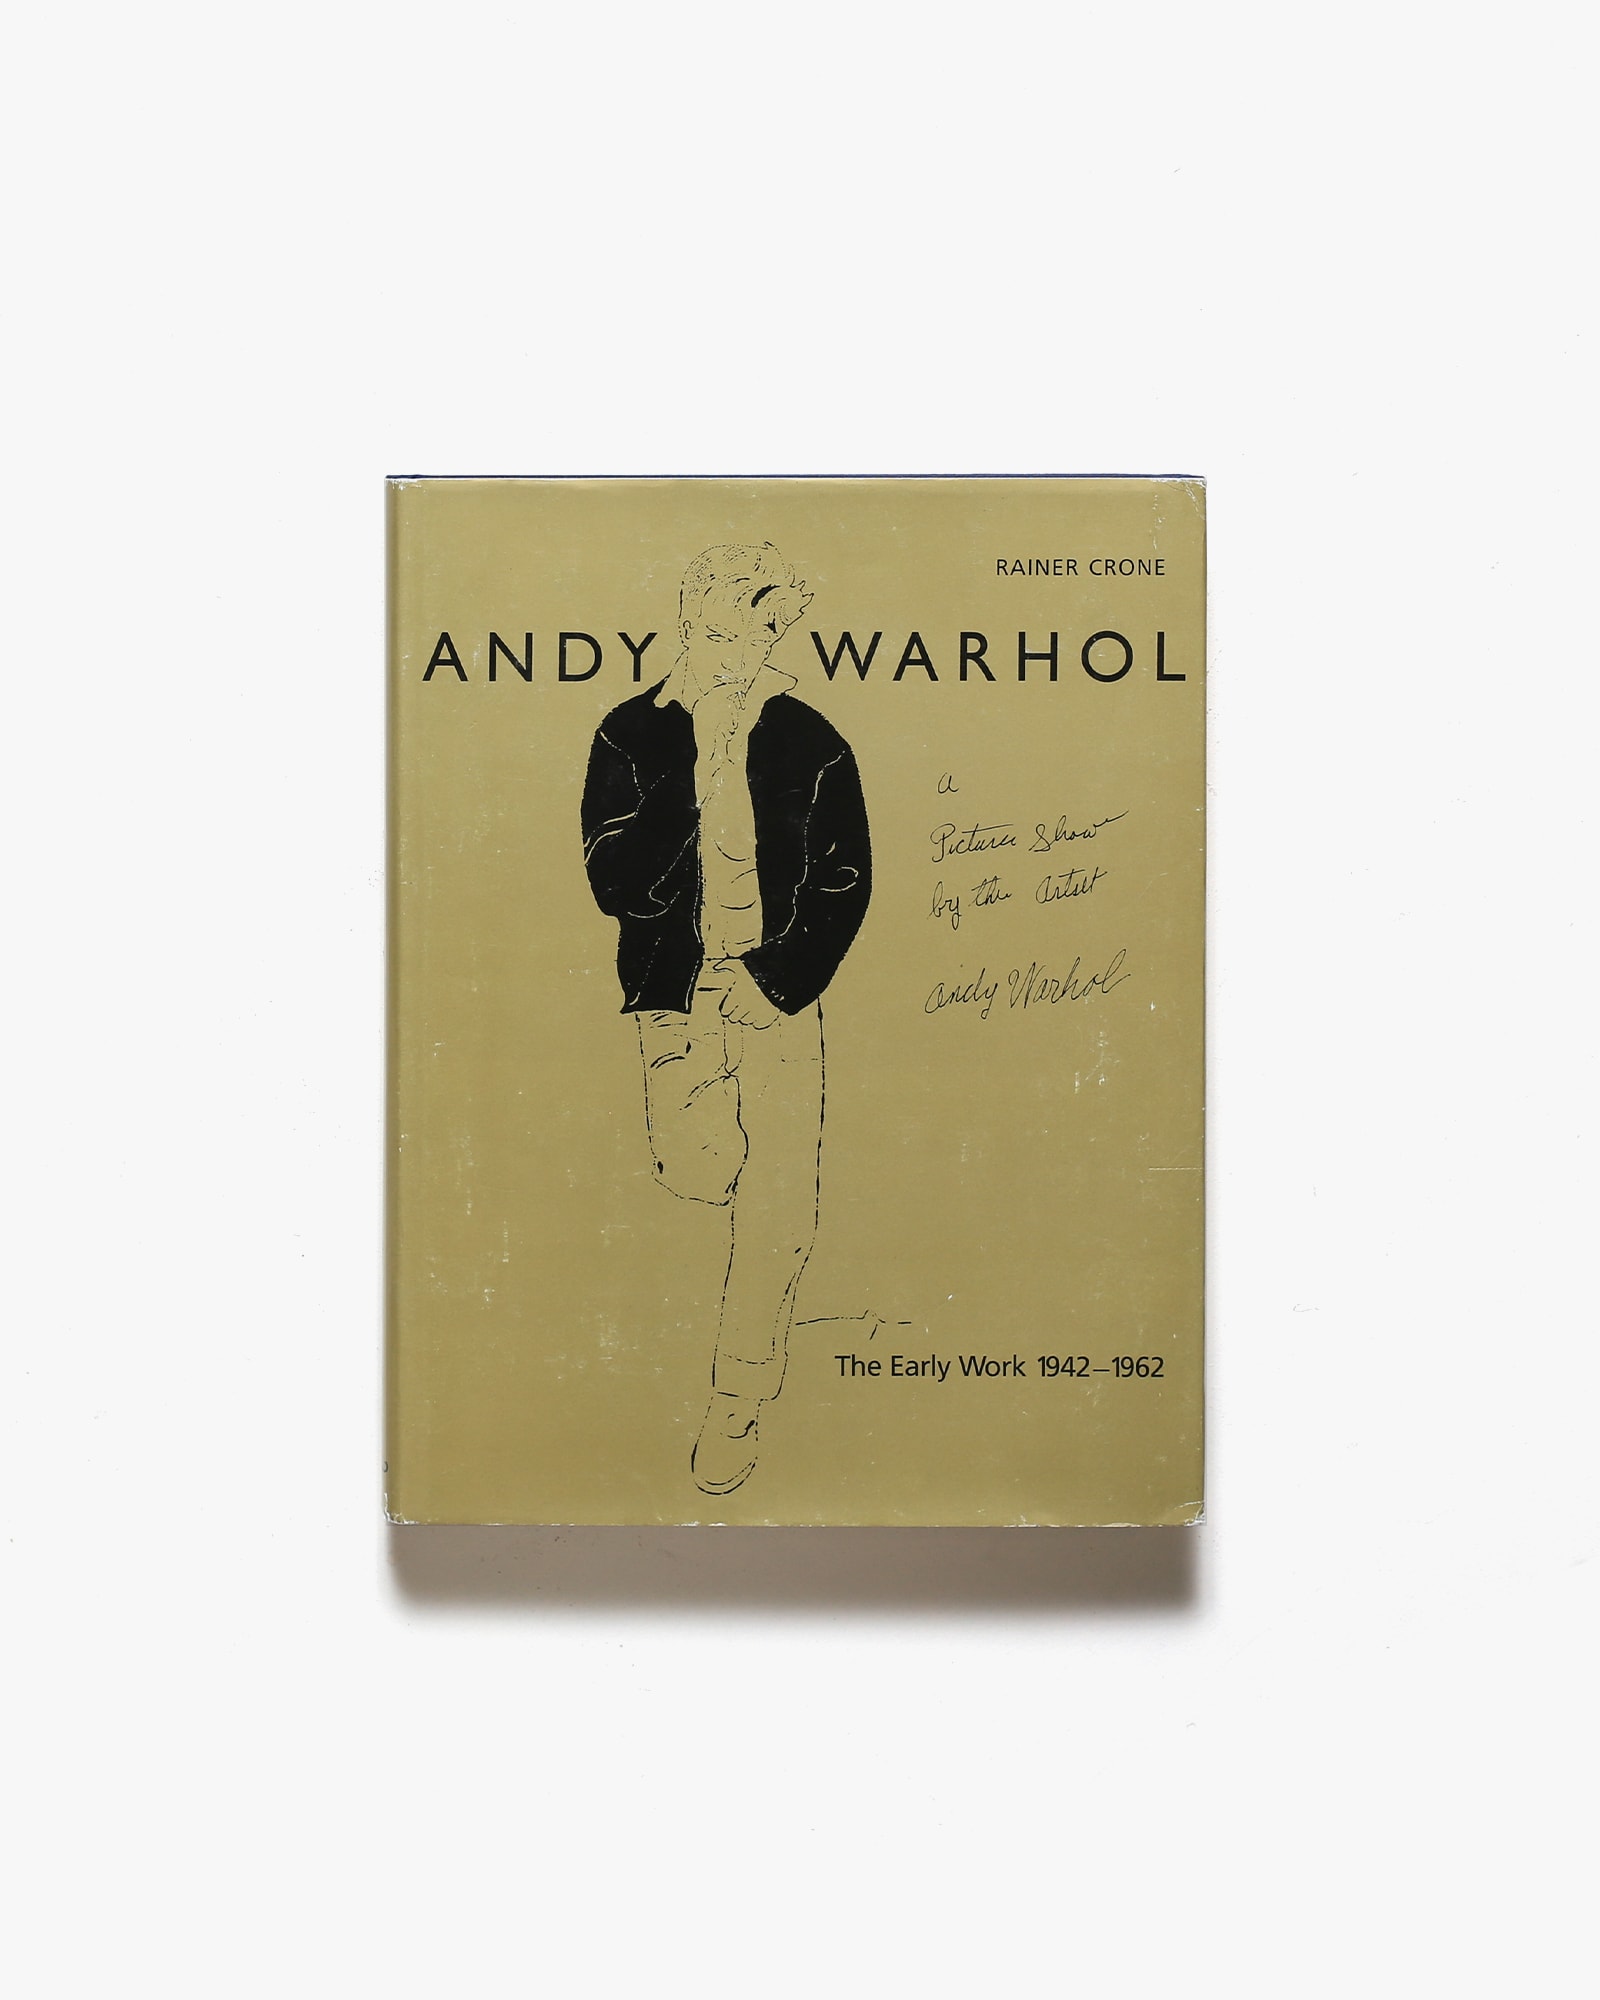 Andy Warhol: A Picture Show by the Artist - The Early Work 1942-1962